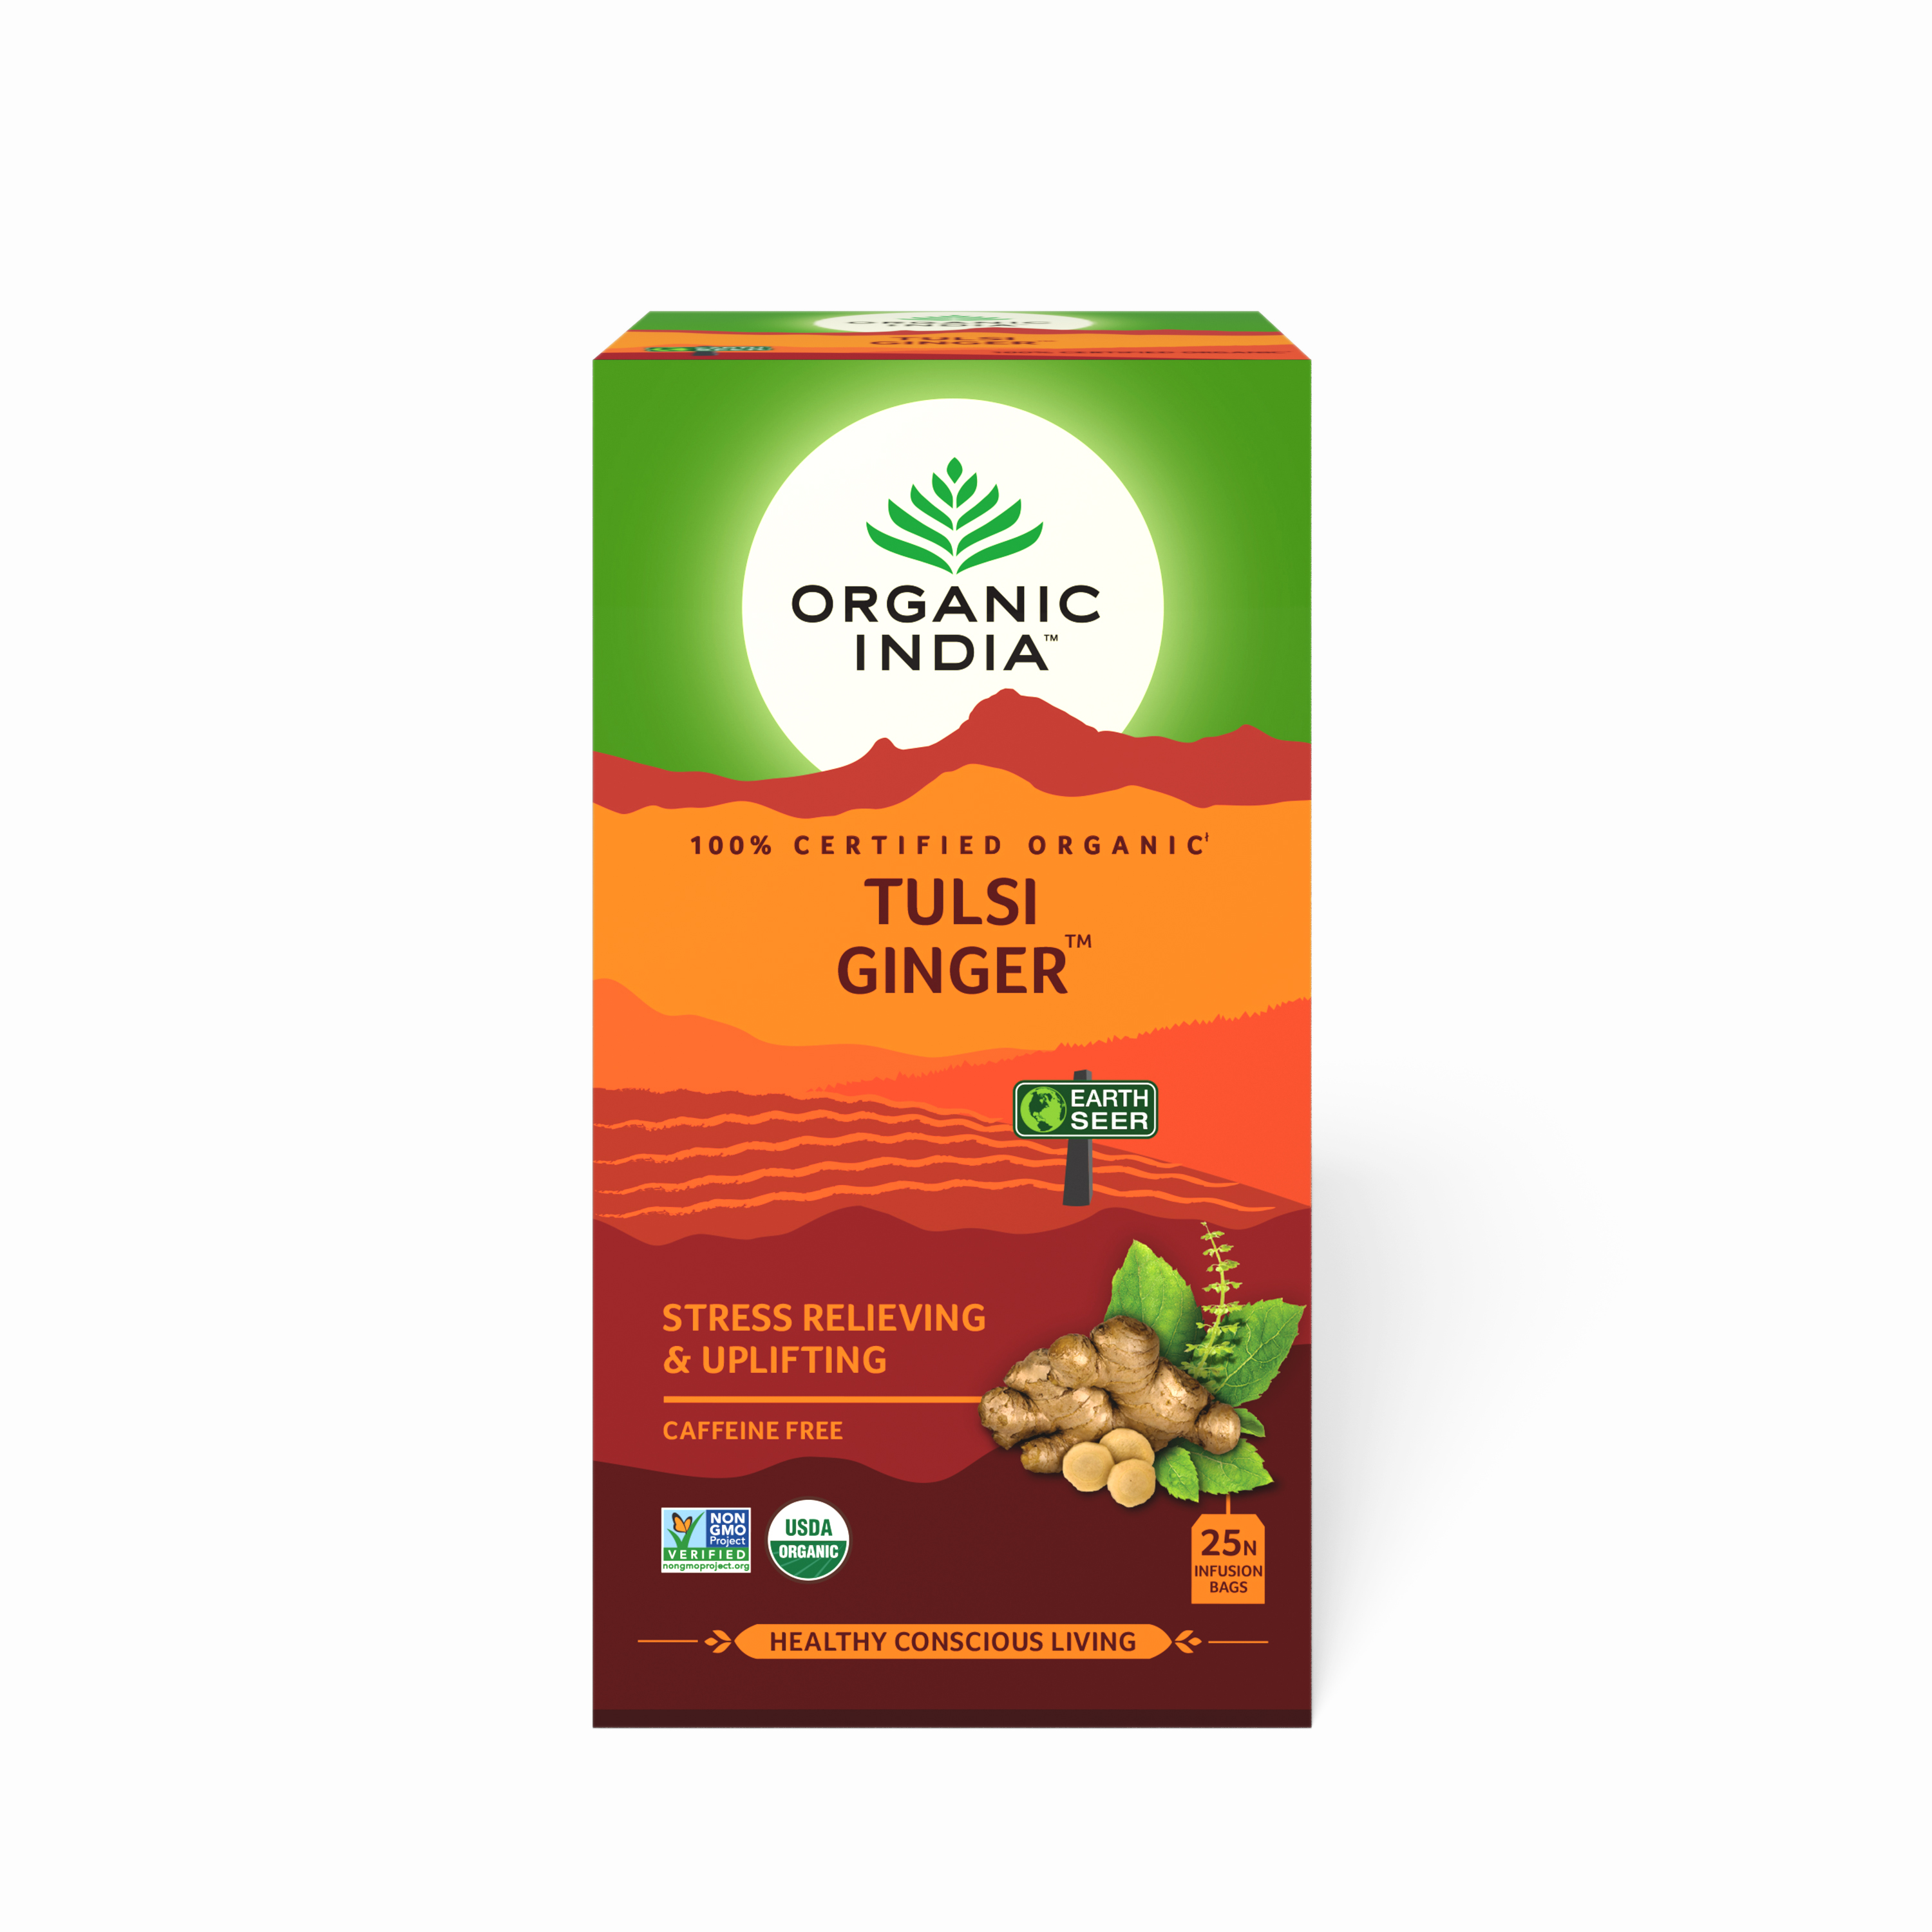 Buy Organic India Tulsi Ginger at Best Price Online